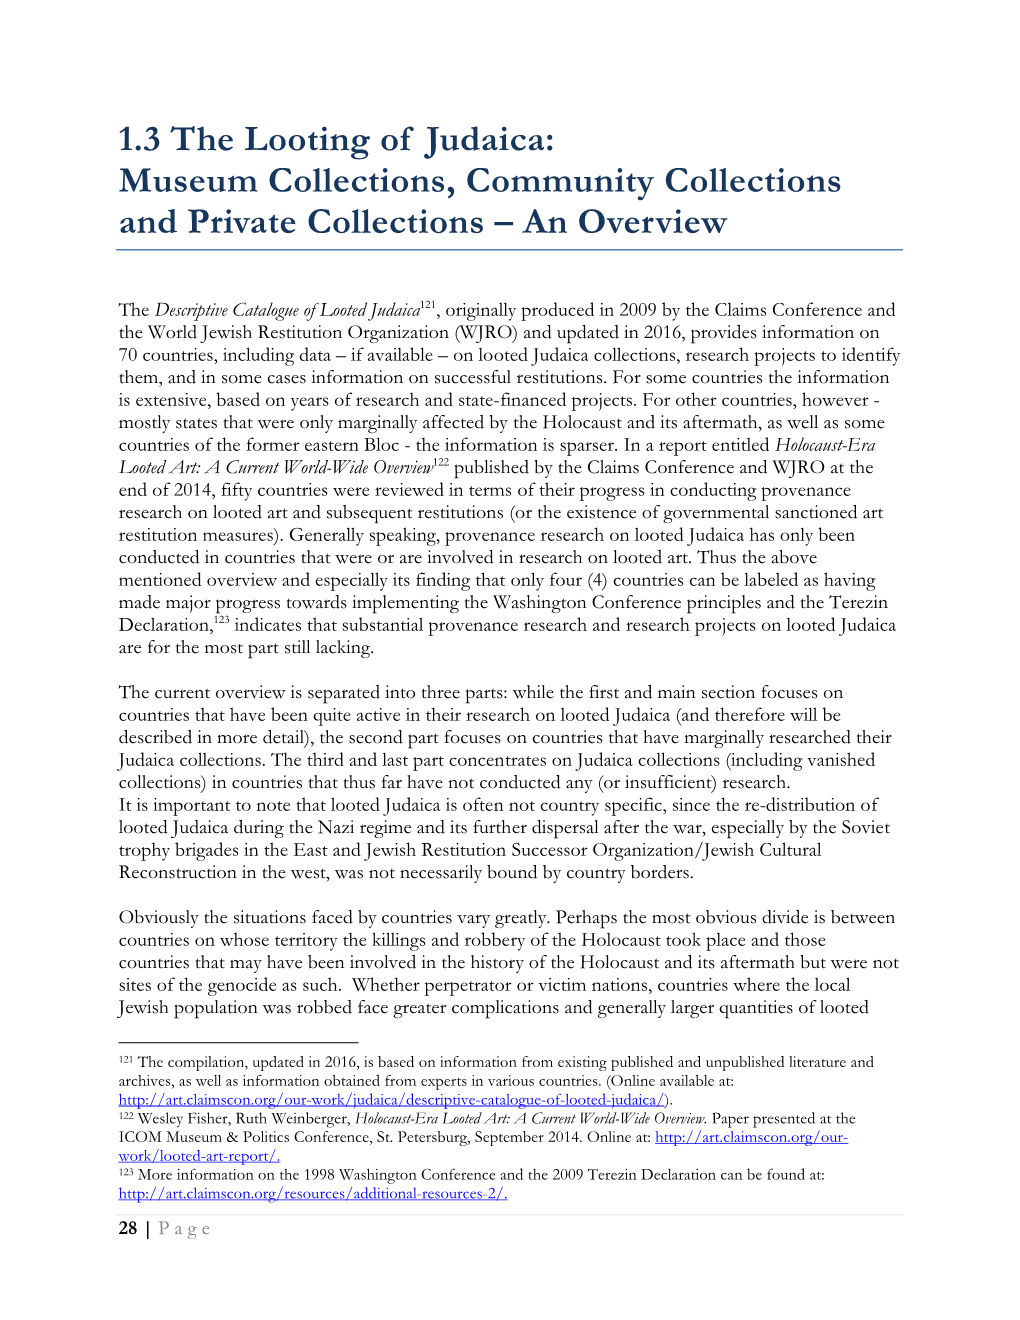 1.3 the Looting of Judaica: Museum Collections, Community Collections and Private Collections – an Overview